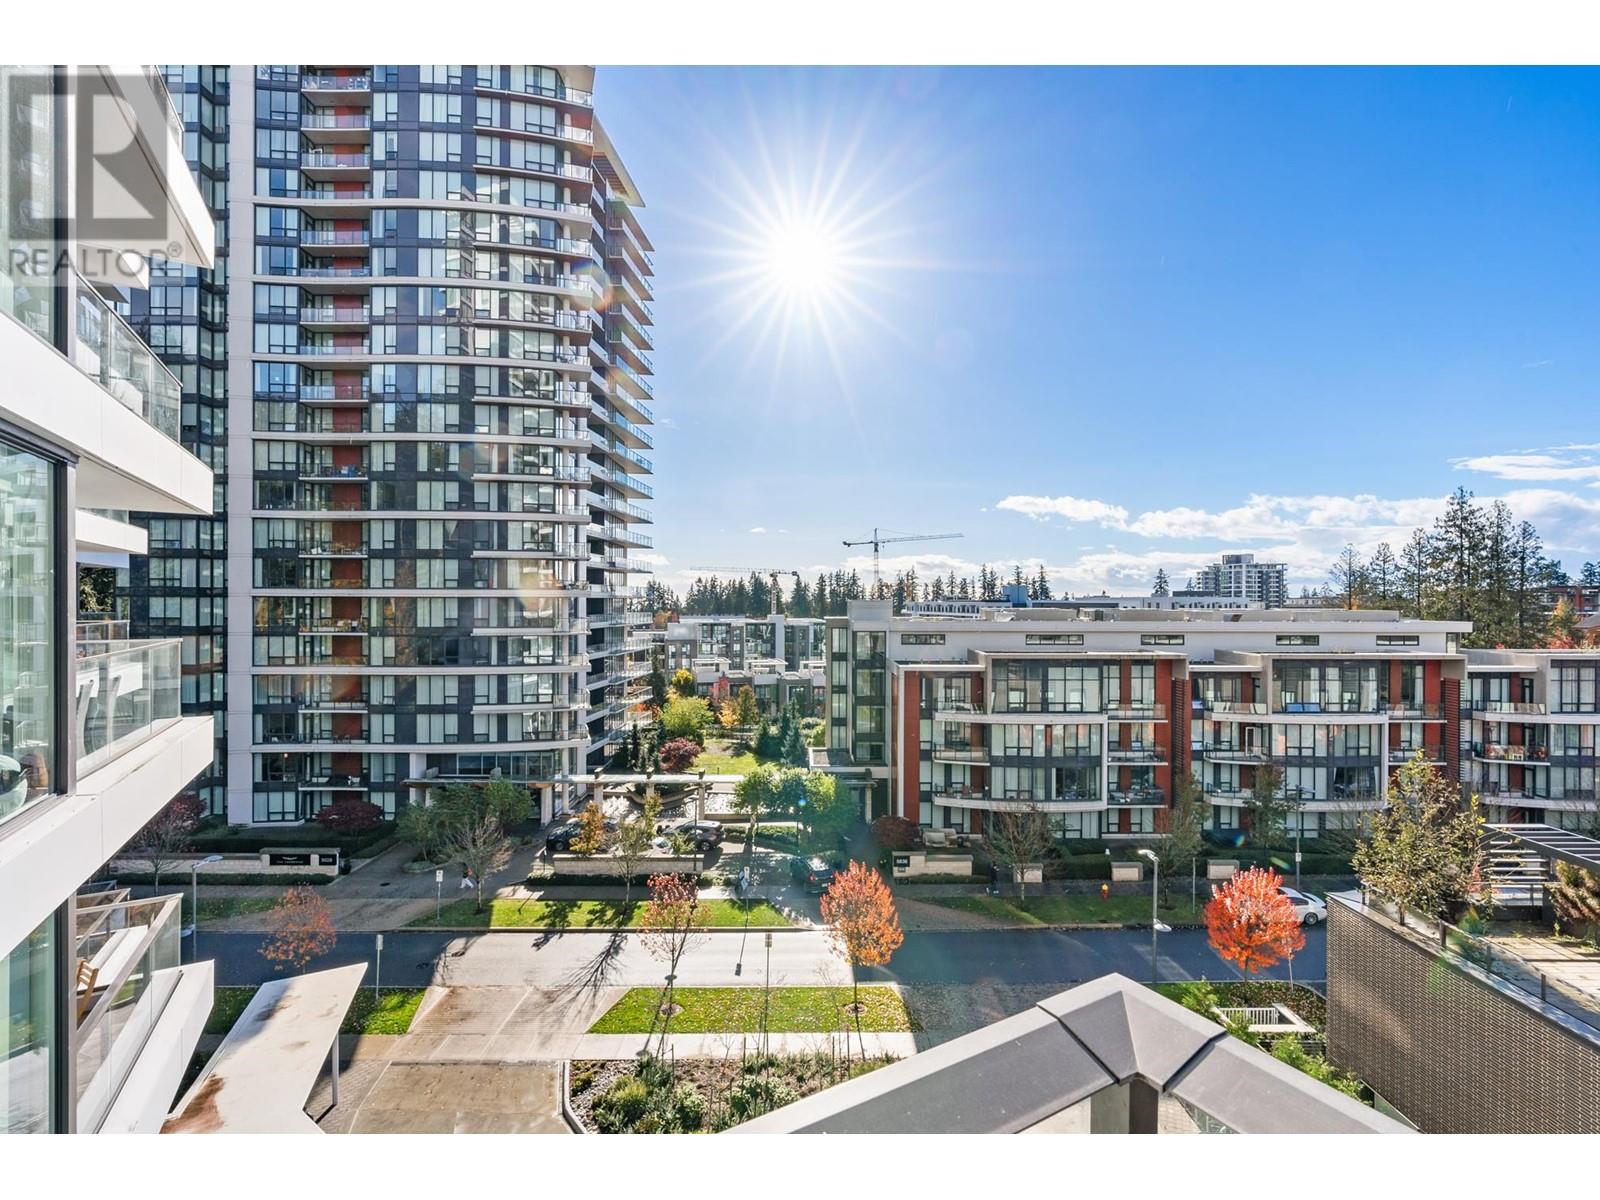 Listing Picture 17 of 33 : 602 5629 BIRNEY AVENUE, Vancouver / 溫哥華 - 魯藝地產 Yvonne Lu Group - MLS Medallion Club Member